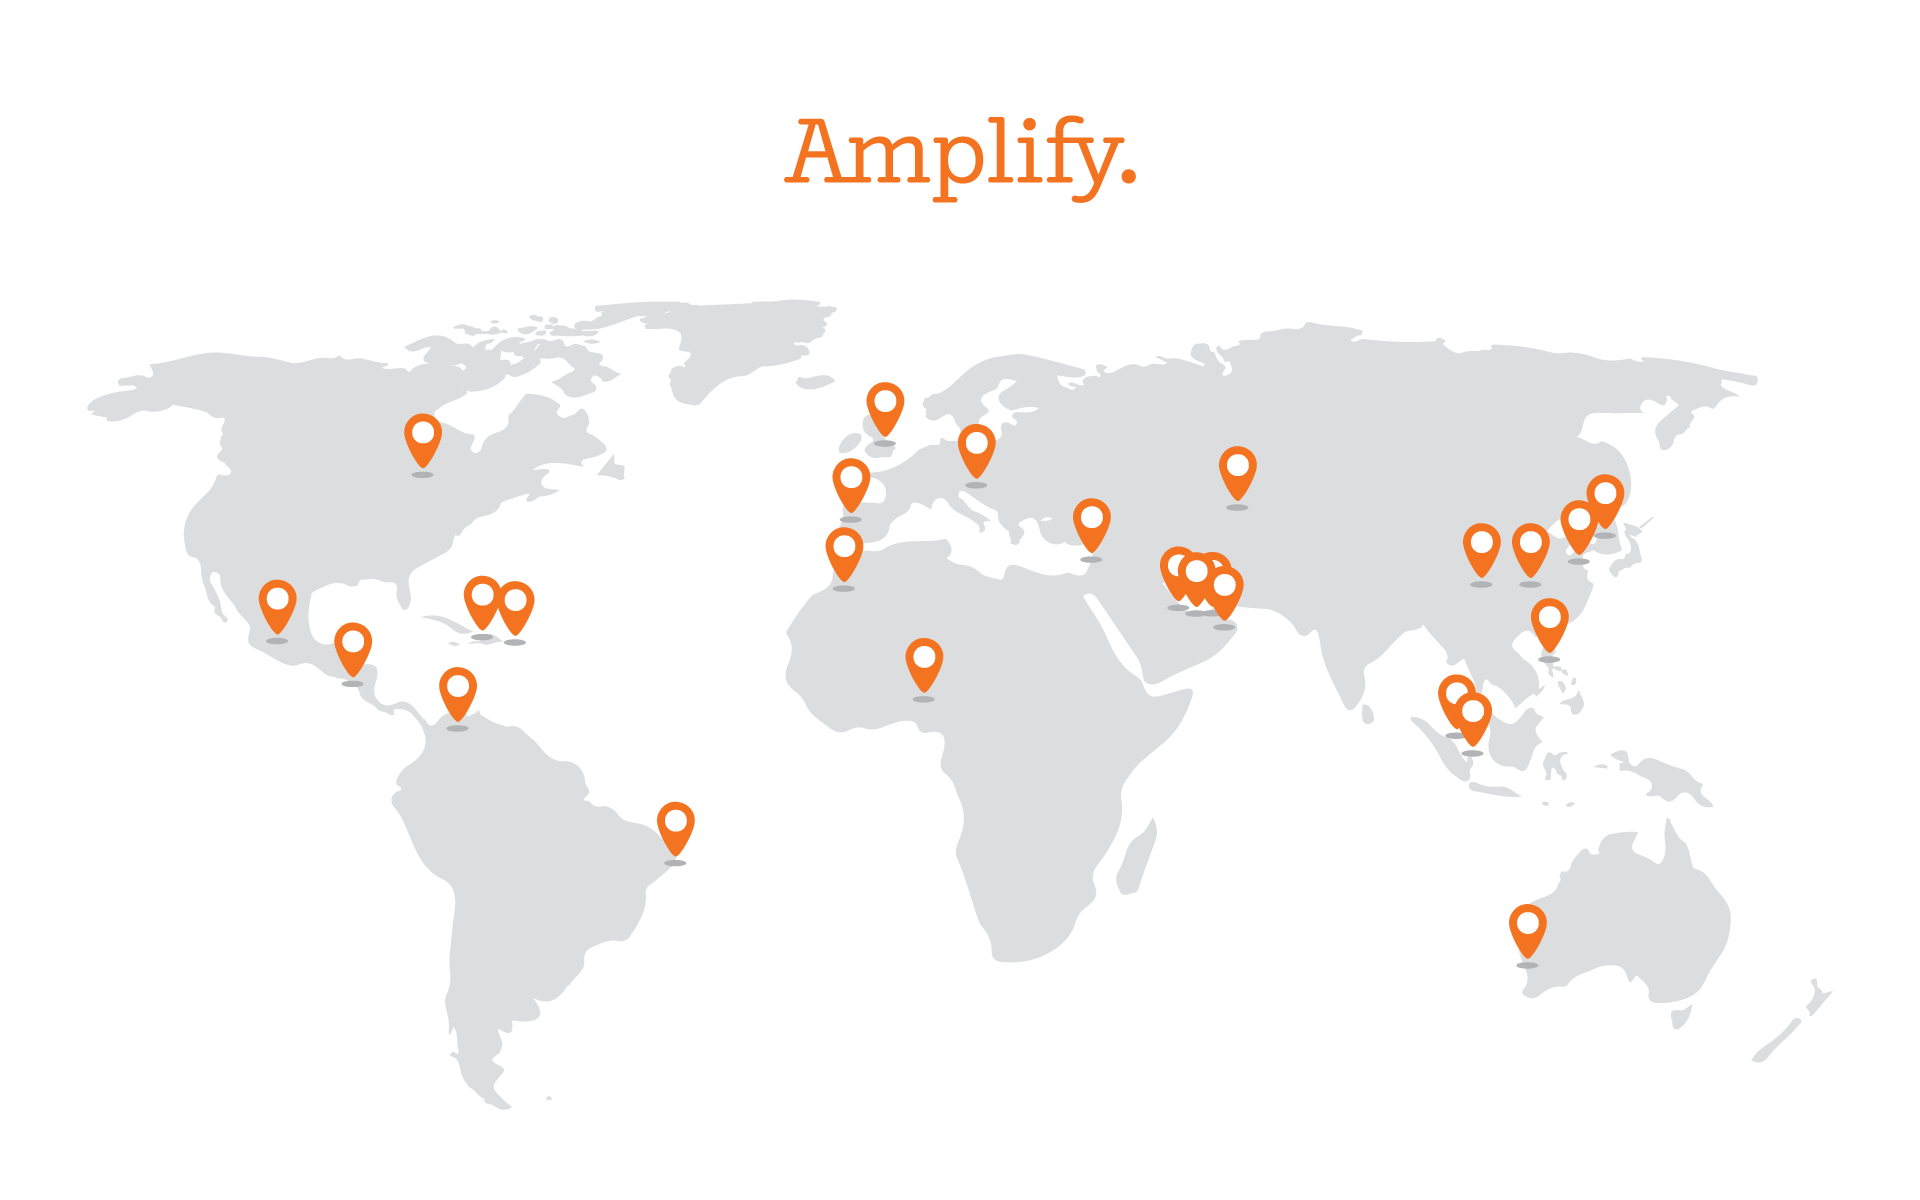 World map in gray with orange location markers on various continents and the word 